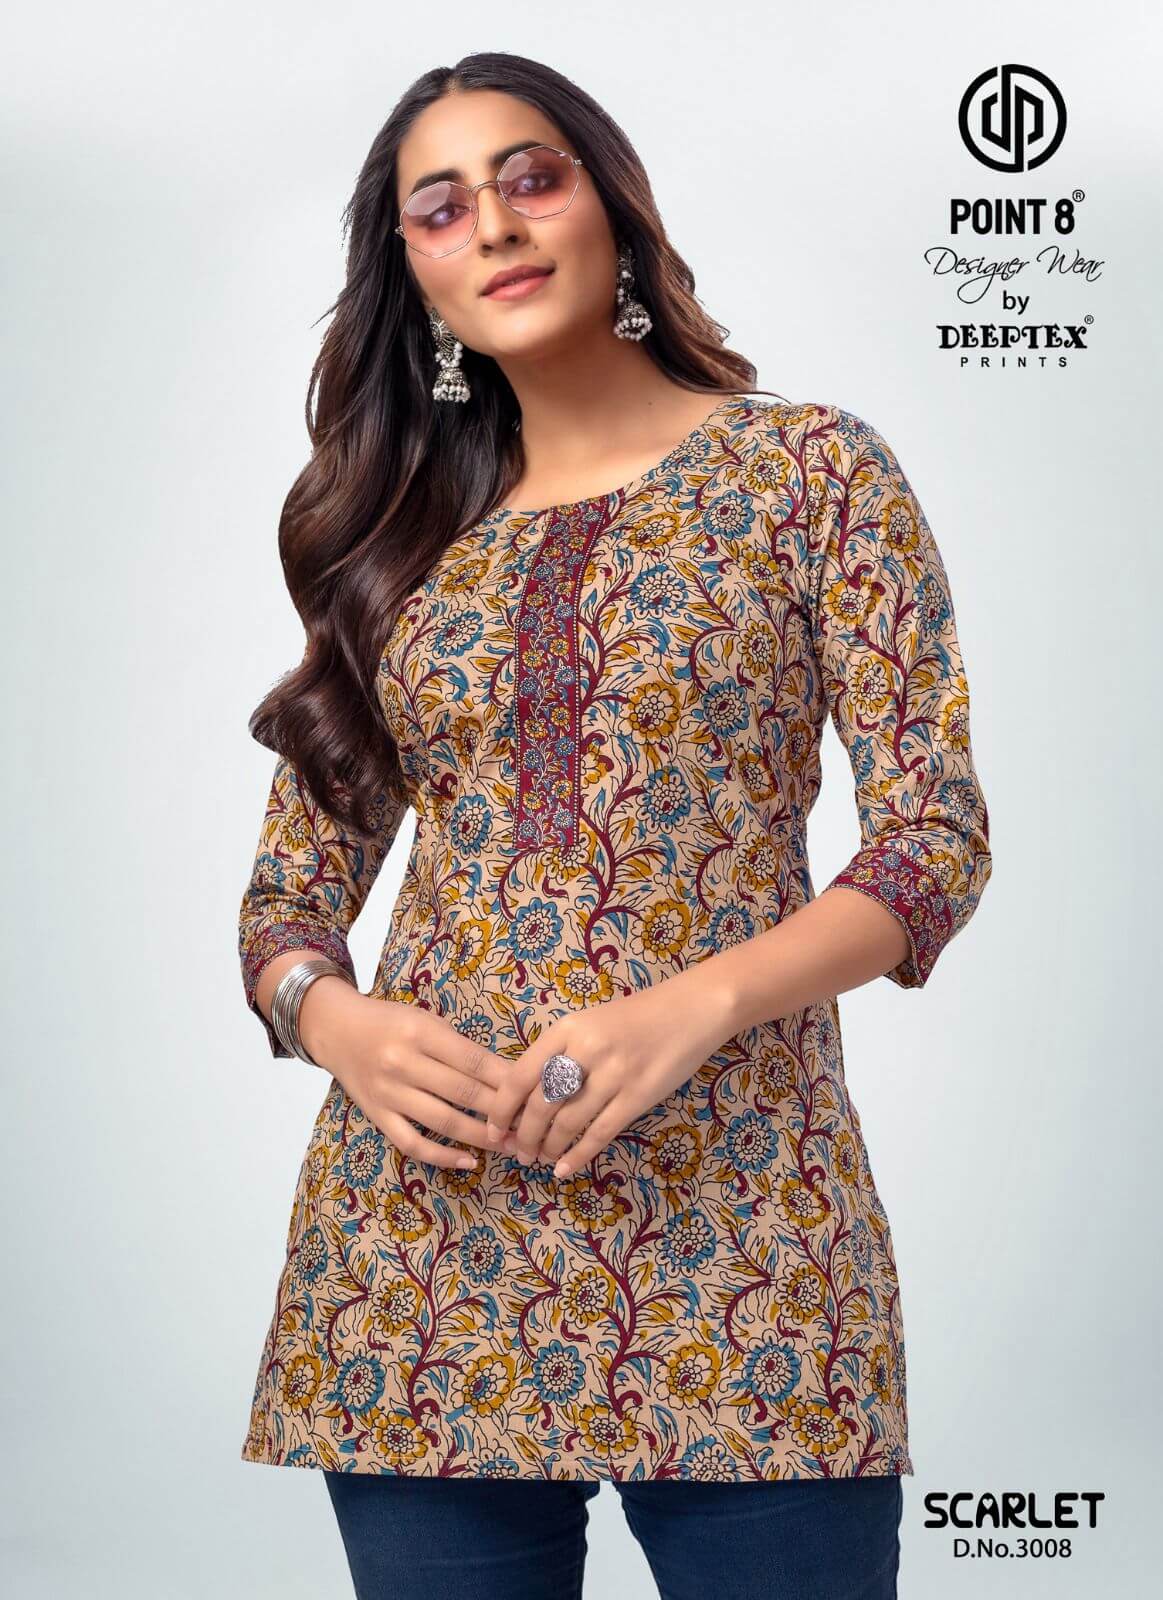 Deeptex Point 8 Scarlet Vol 3 Ladies Top Catalog collection 9